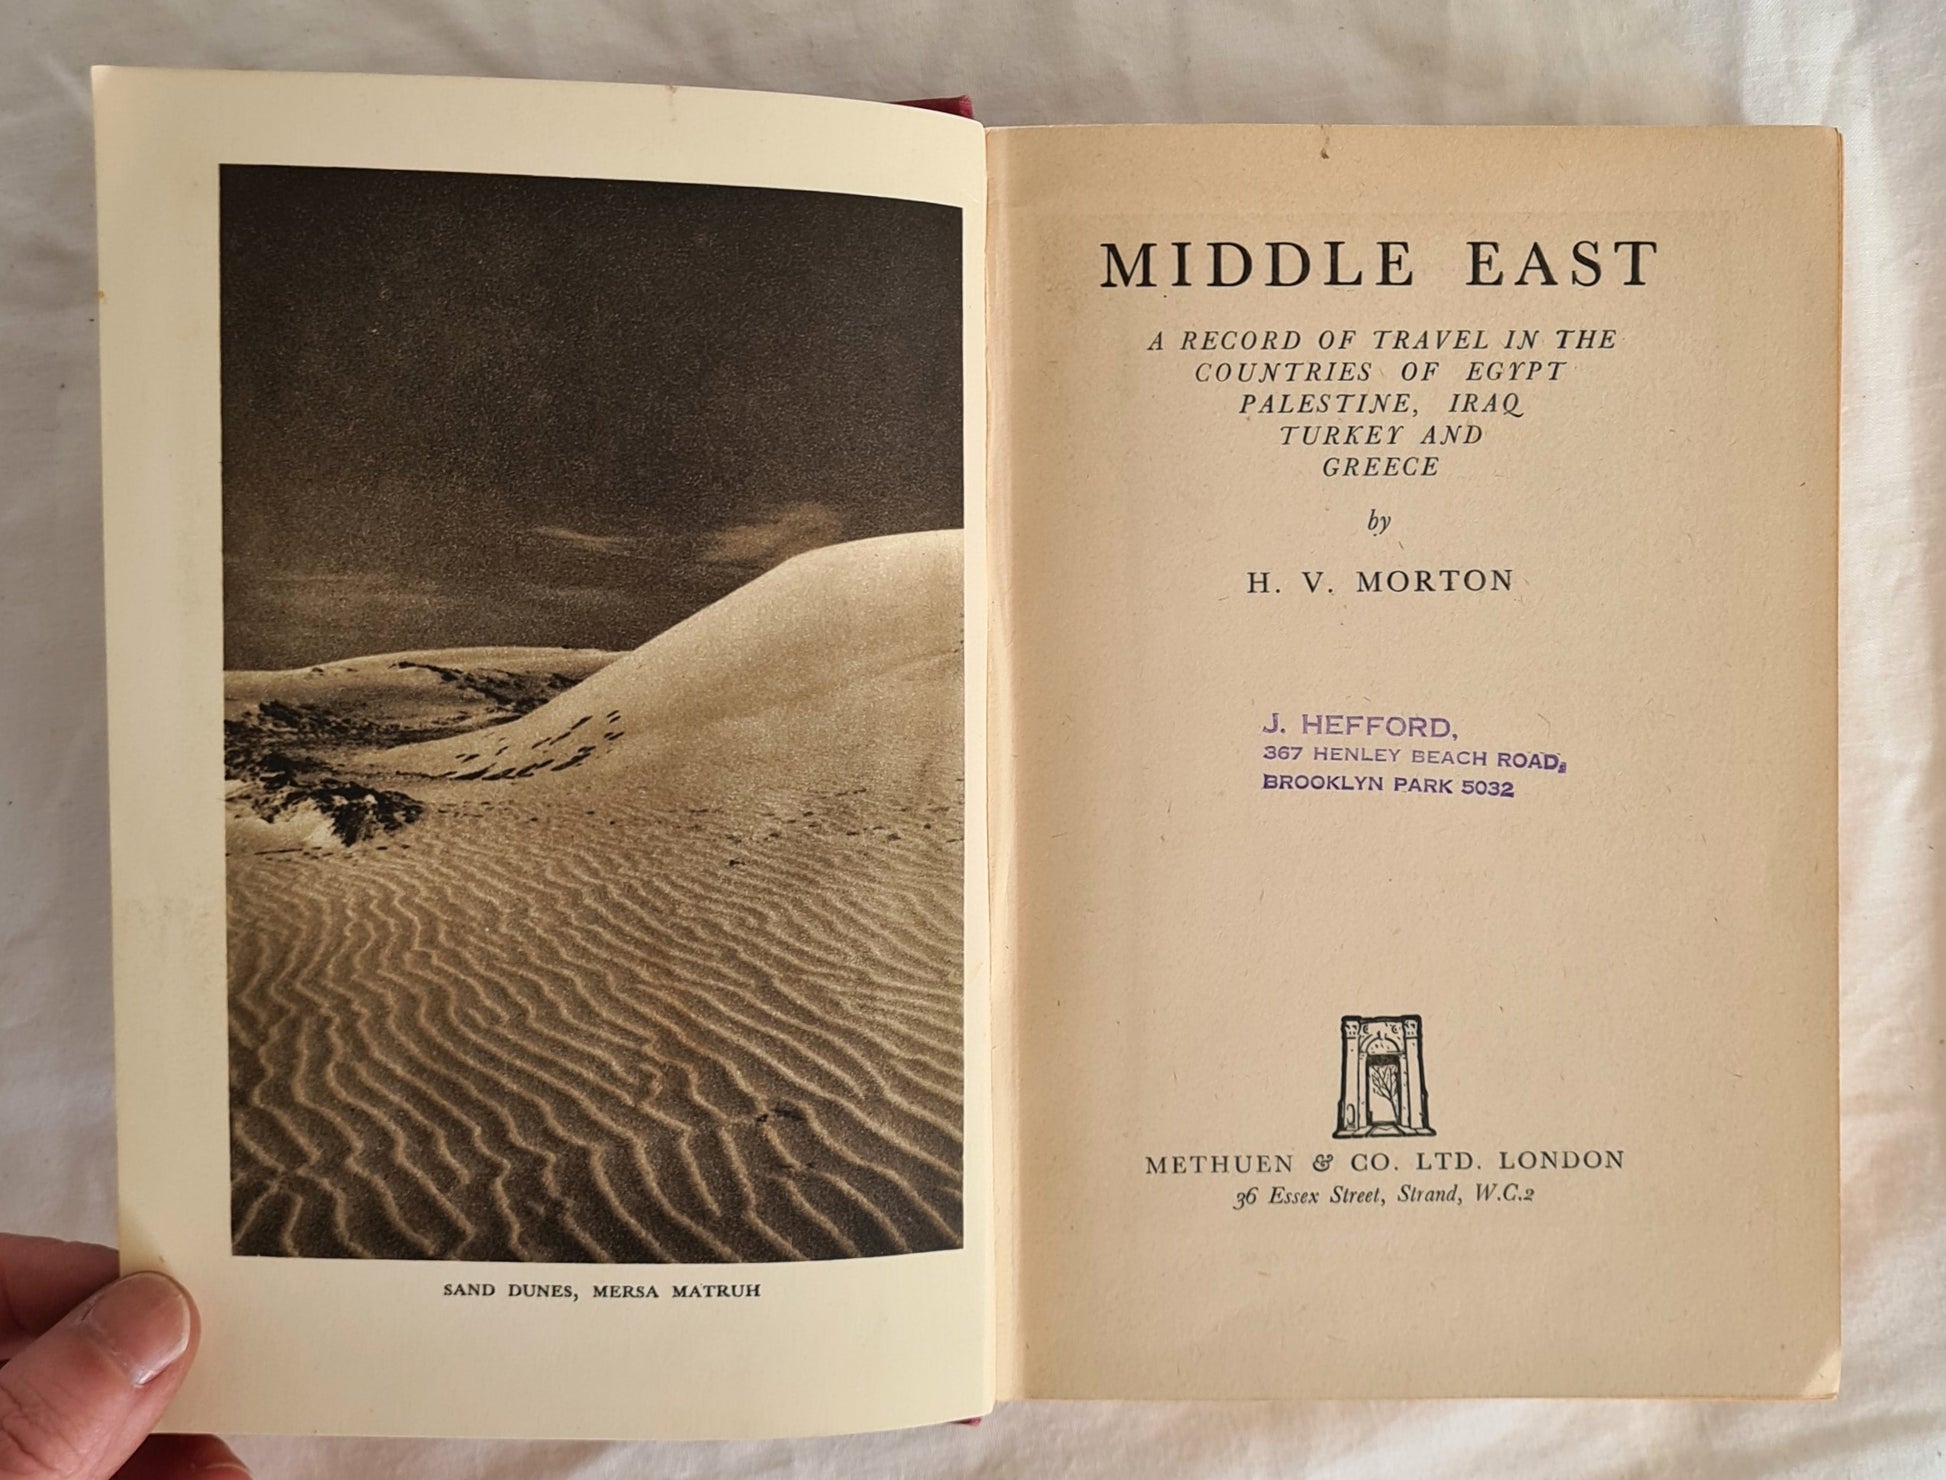 Middle East  A Record of Travel in the Countries of Egypt Palestine, Iraq Turkey and Greece  by H. V. Morton